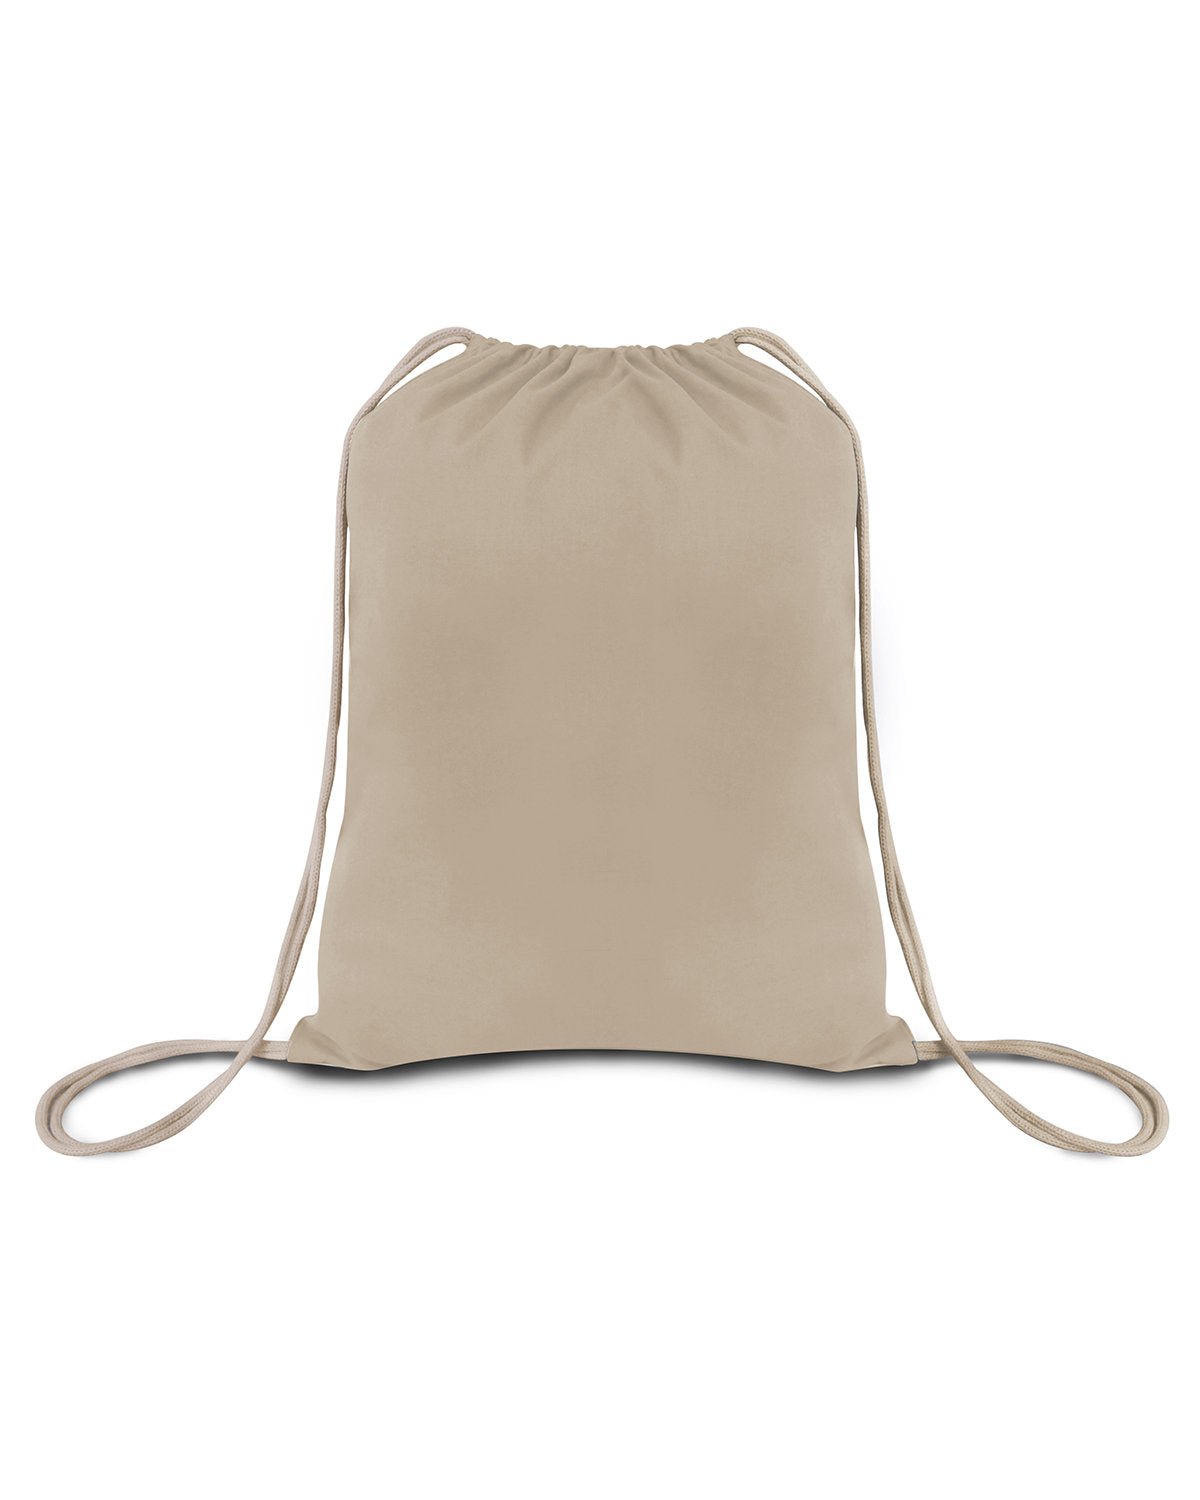 OAD101-OAD-NATURAL-OAD-Bags and Accessories-1